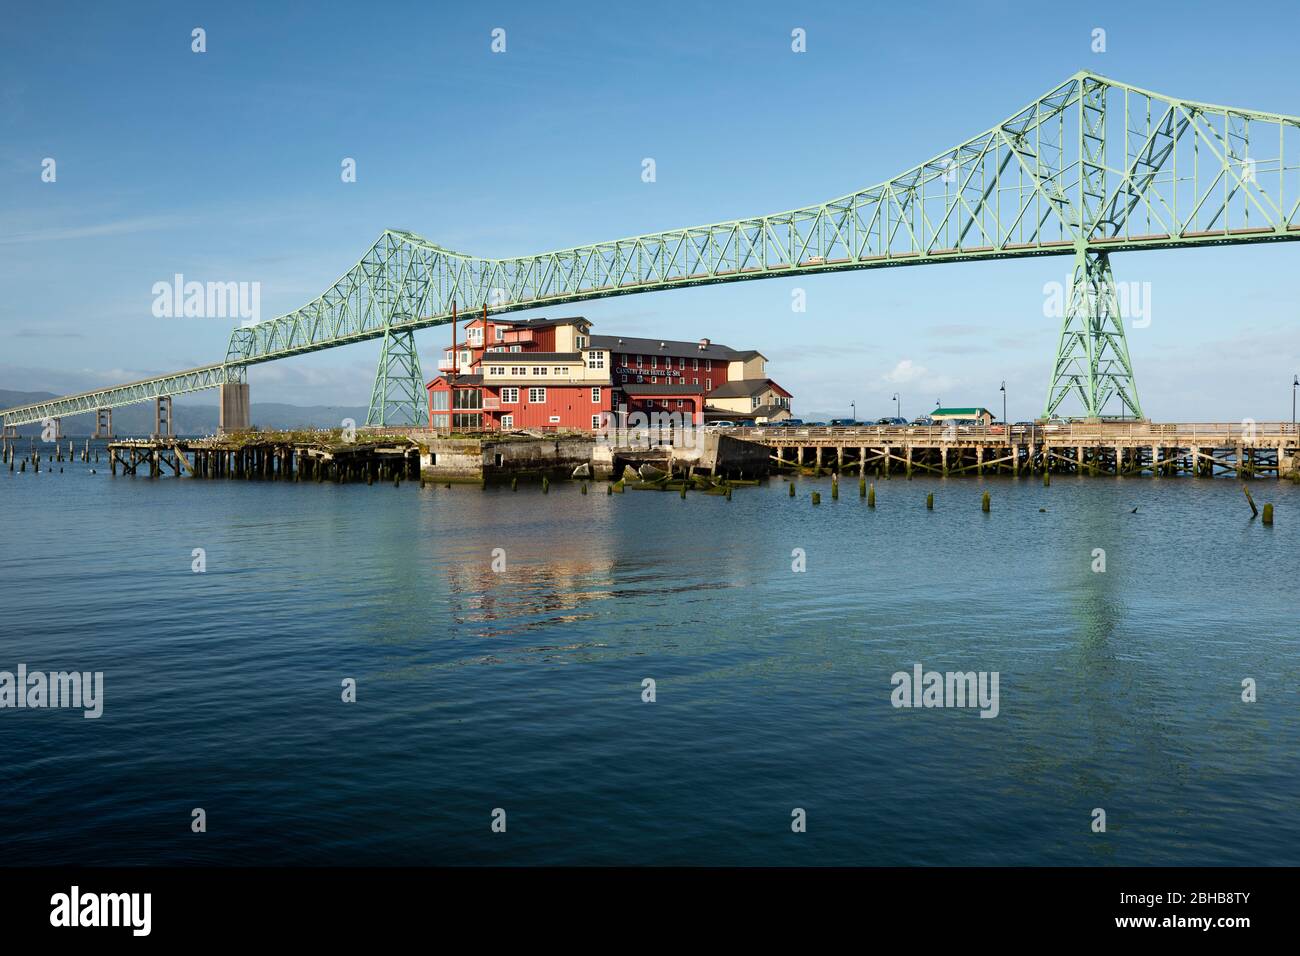 Low angle view of Astoria Bridge over river and building, Oregon, USA Stock Photo